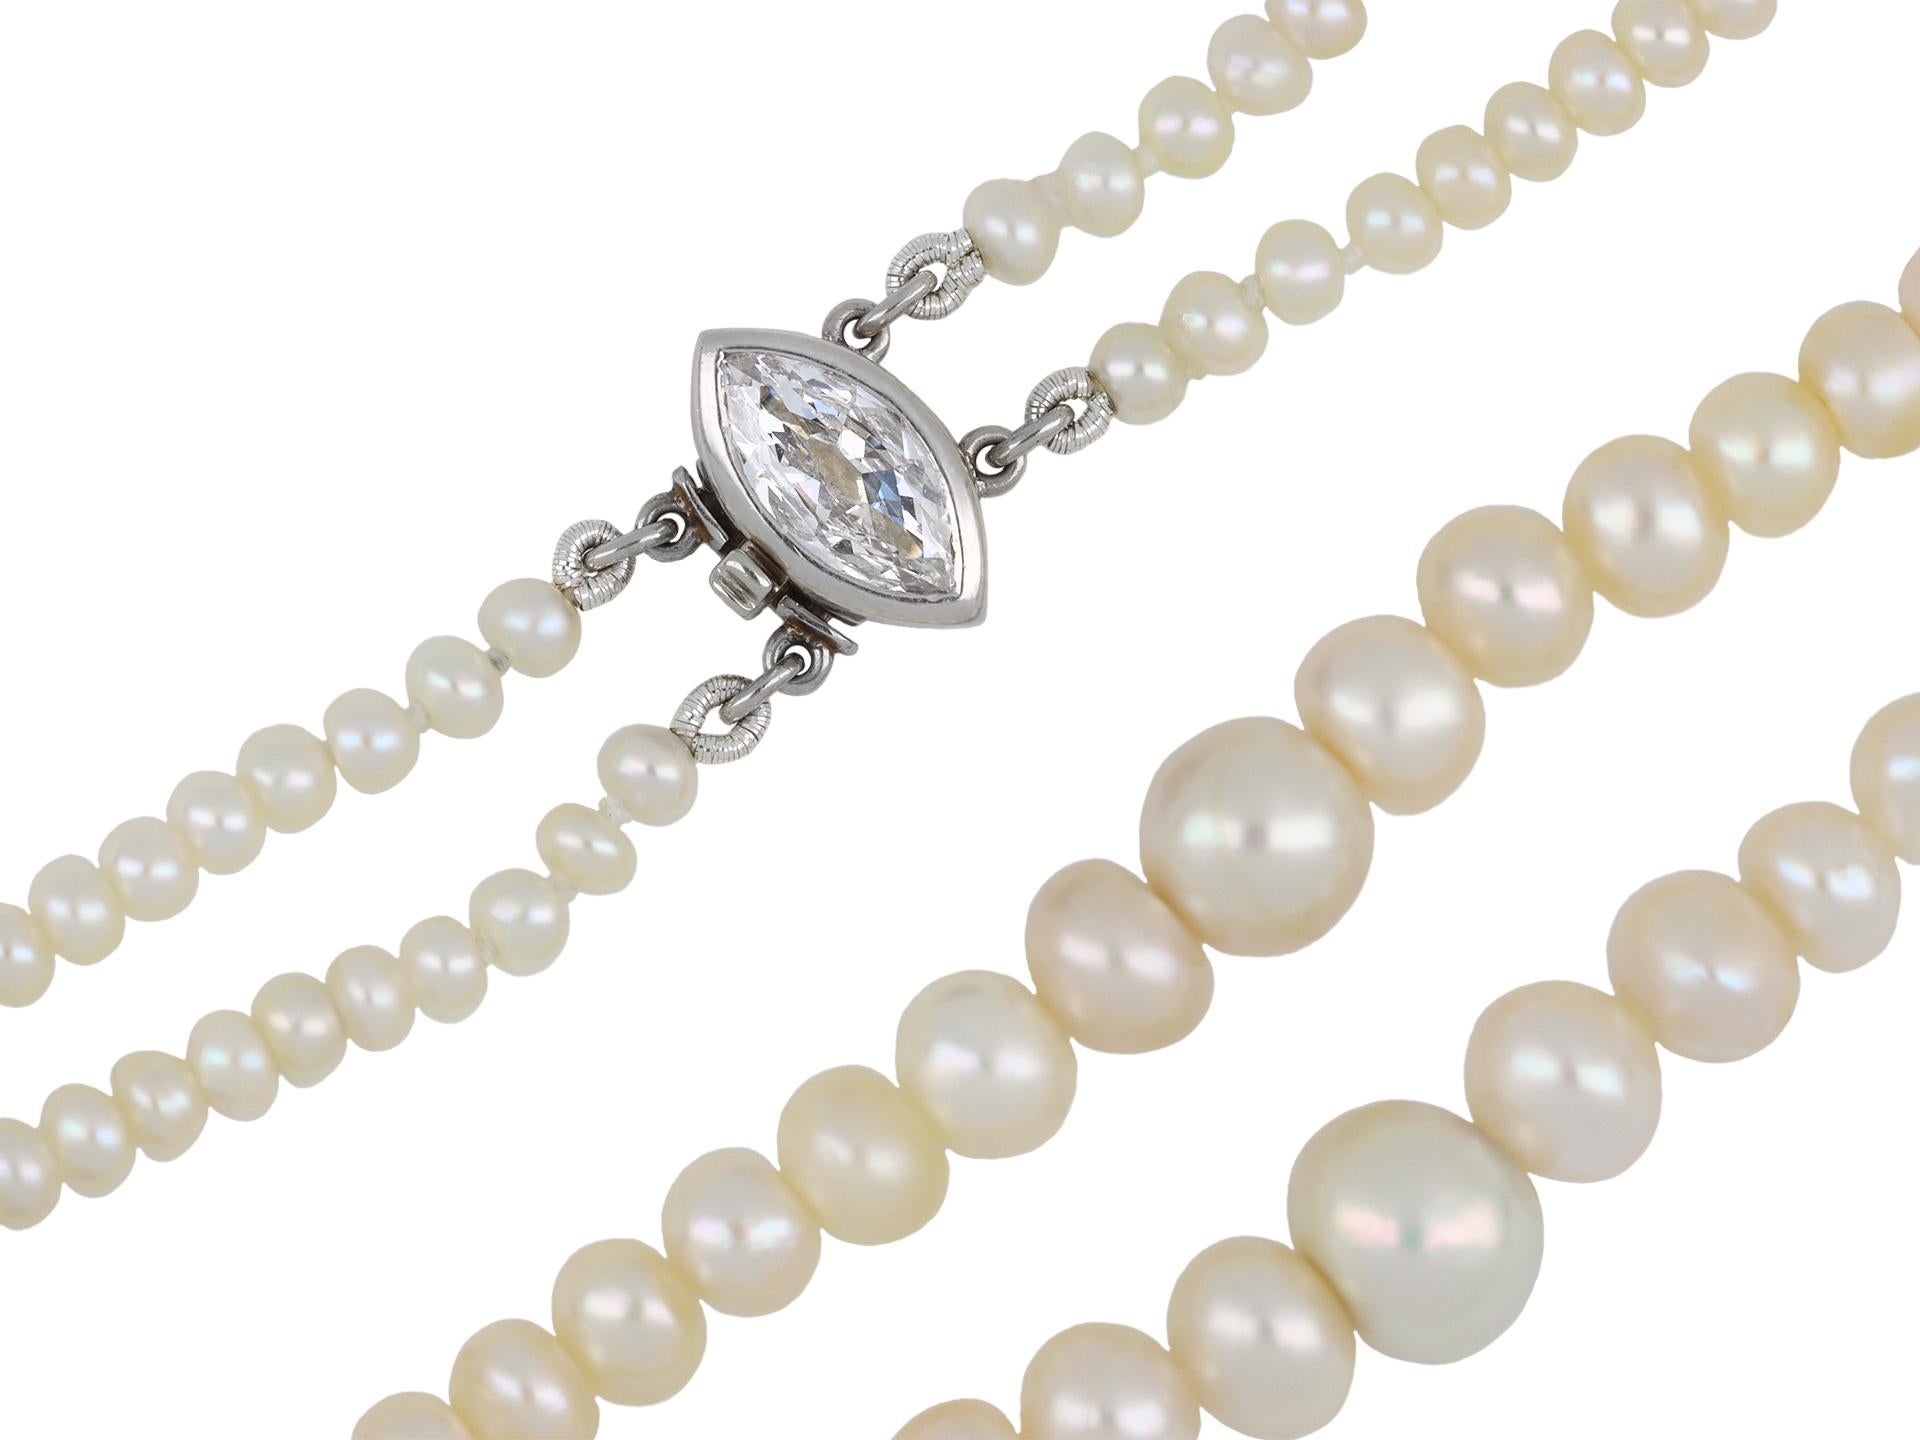 Marcus & Co. natural saltwater pearl necklace. Composed of three hundred and forty-eight natural saltwater pearls, further set with a marquise shape old cut diamond in an open back rubover with an approximate weight of 0.60 carats, to an elegant